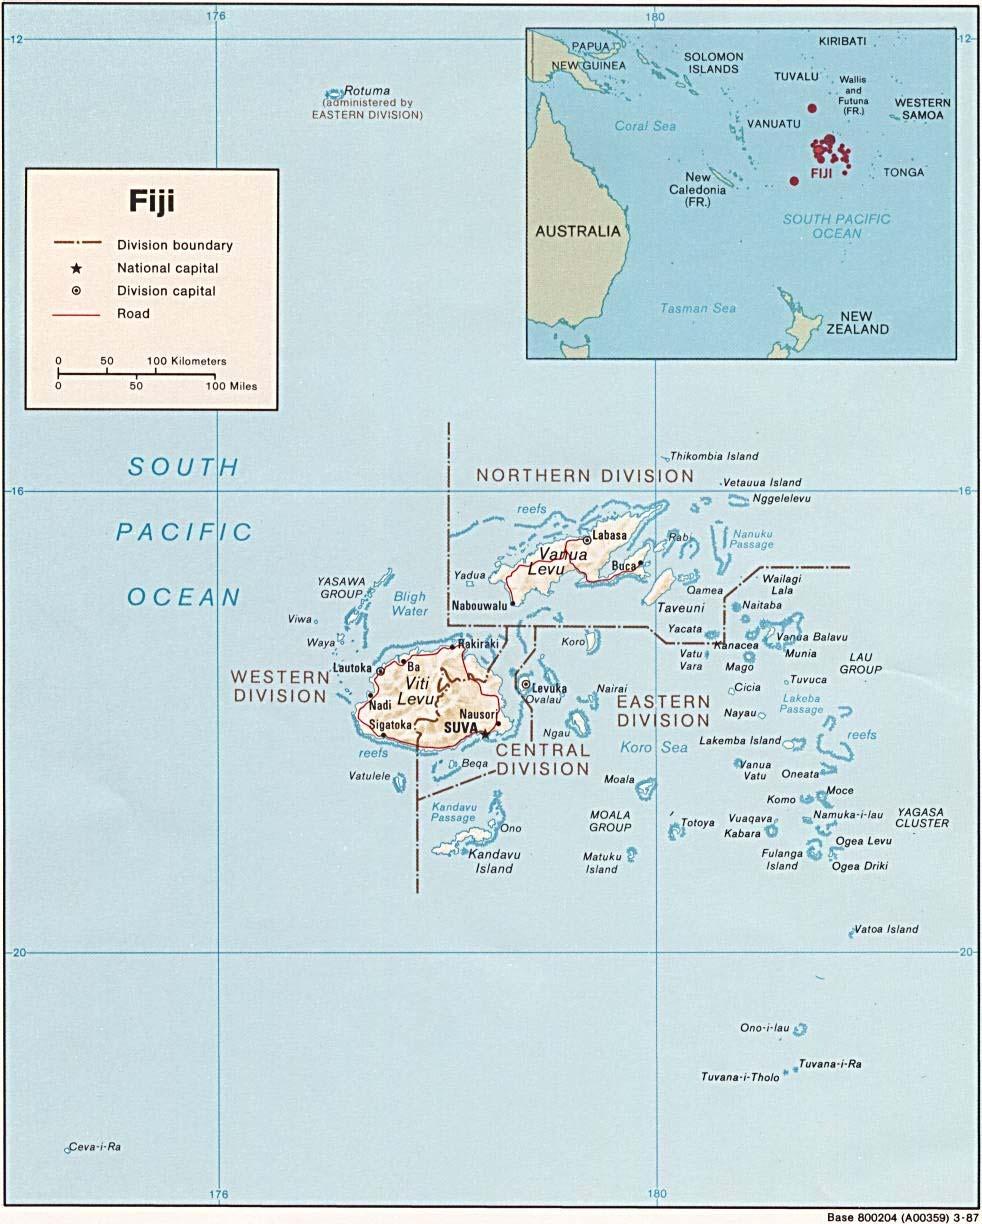 Appendix B: Map of Fiji The image below [27] shows the archipelago of